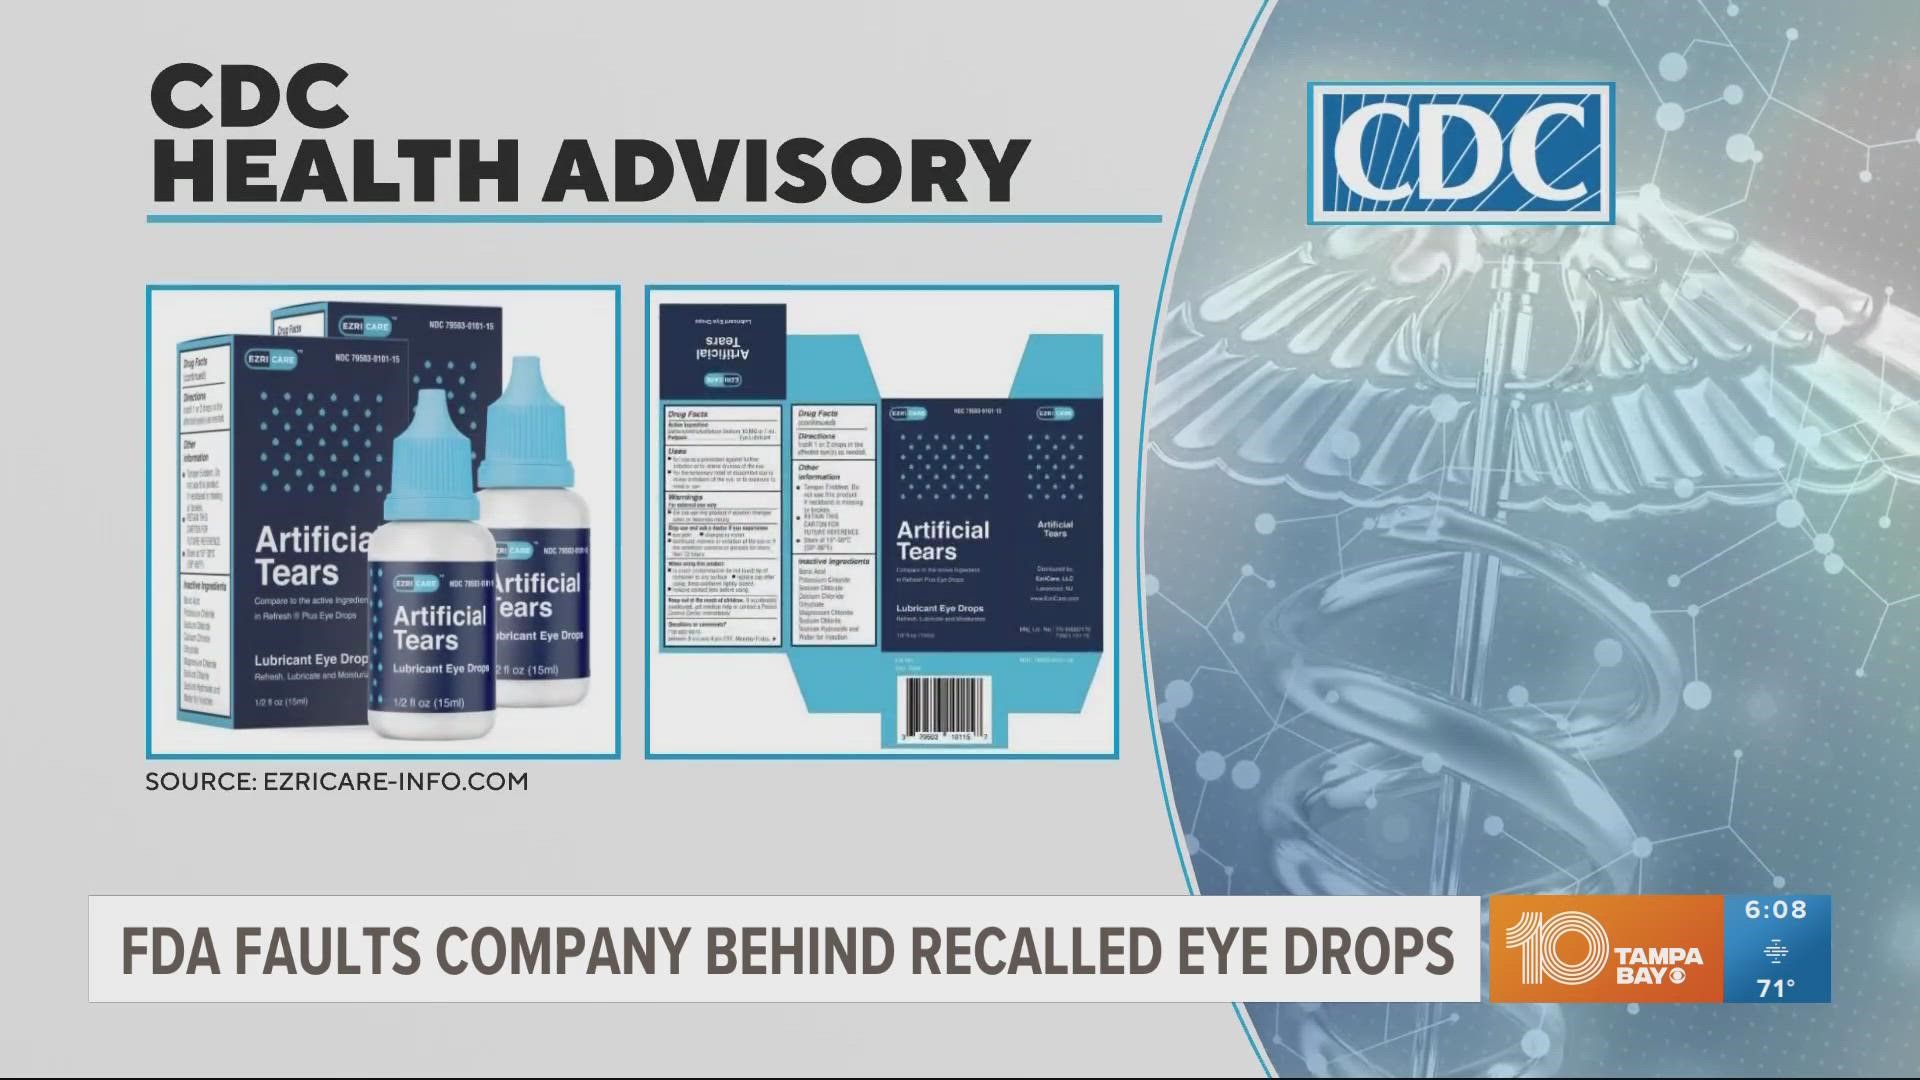 Pharmedica and Apotex are recalling some of their prescription eyedrops used to treat glaucoma.